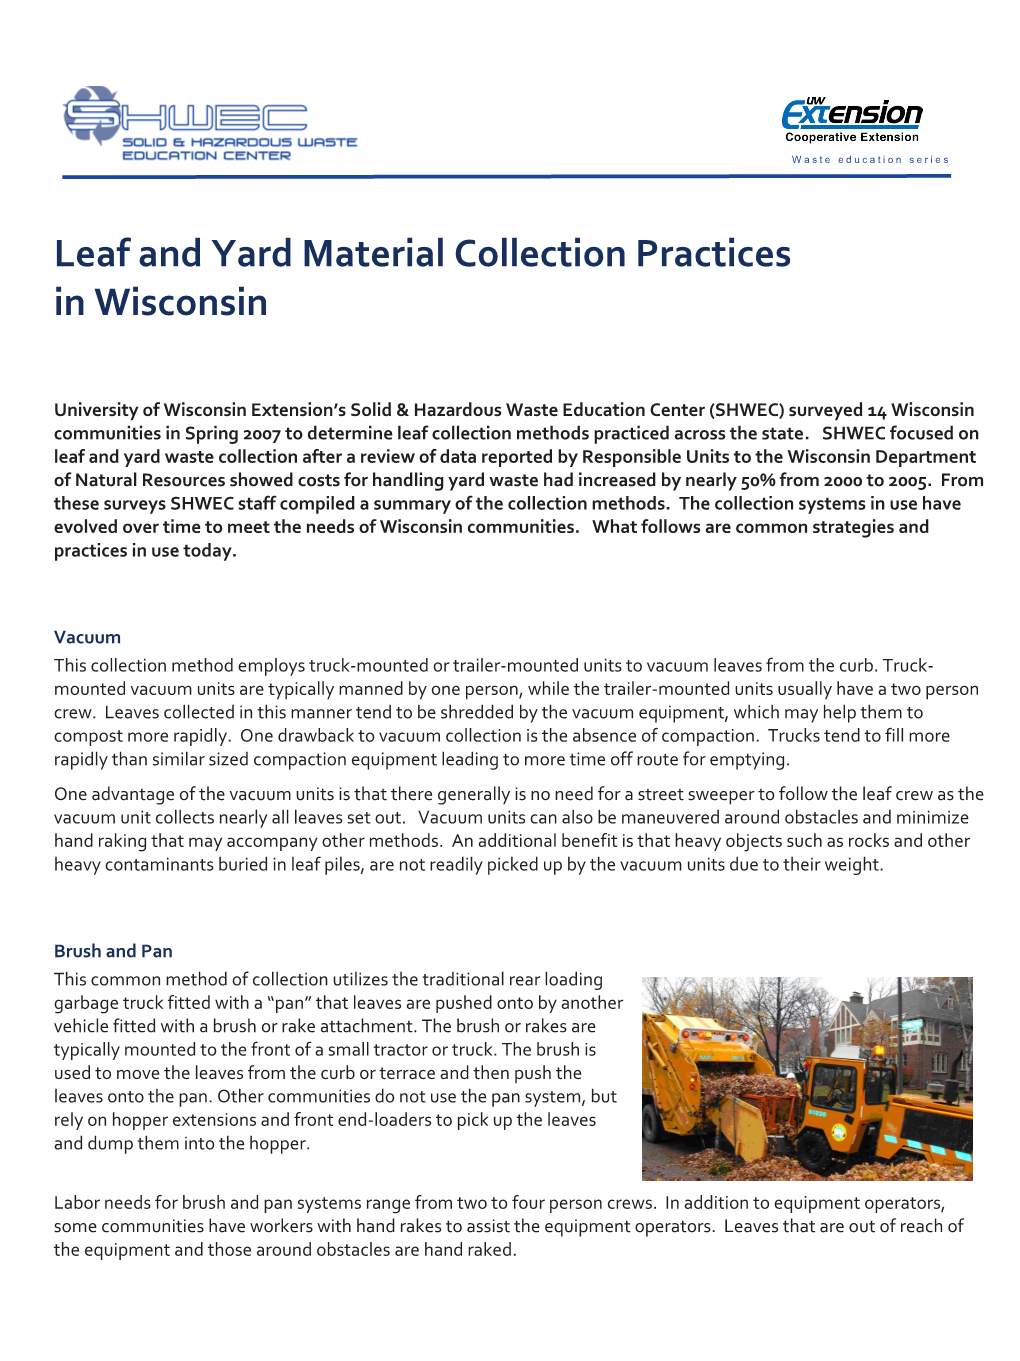 Leaf and Yard Material Collection Practices in Wisconsin